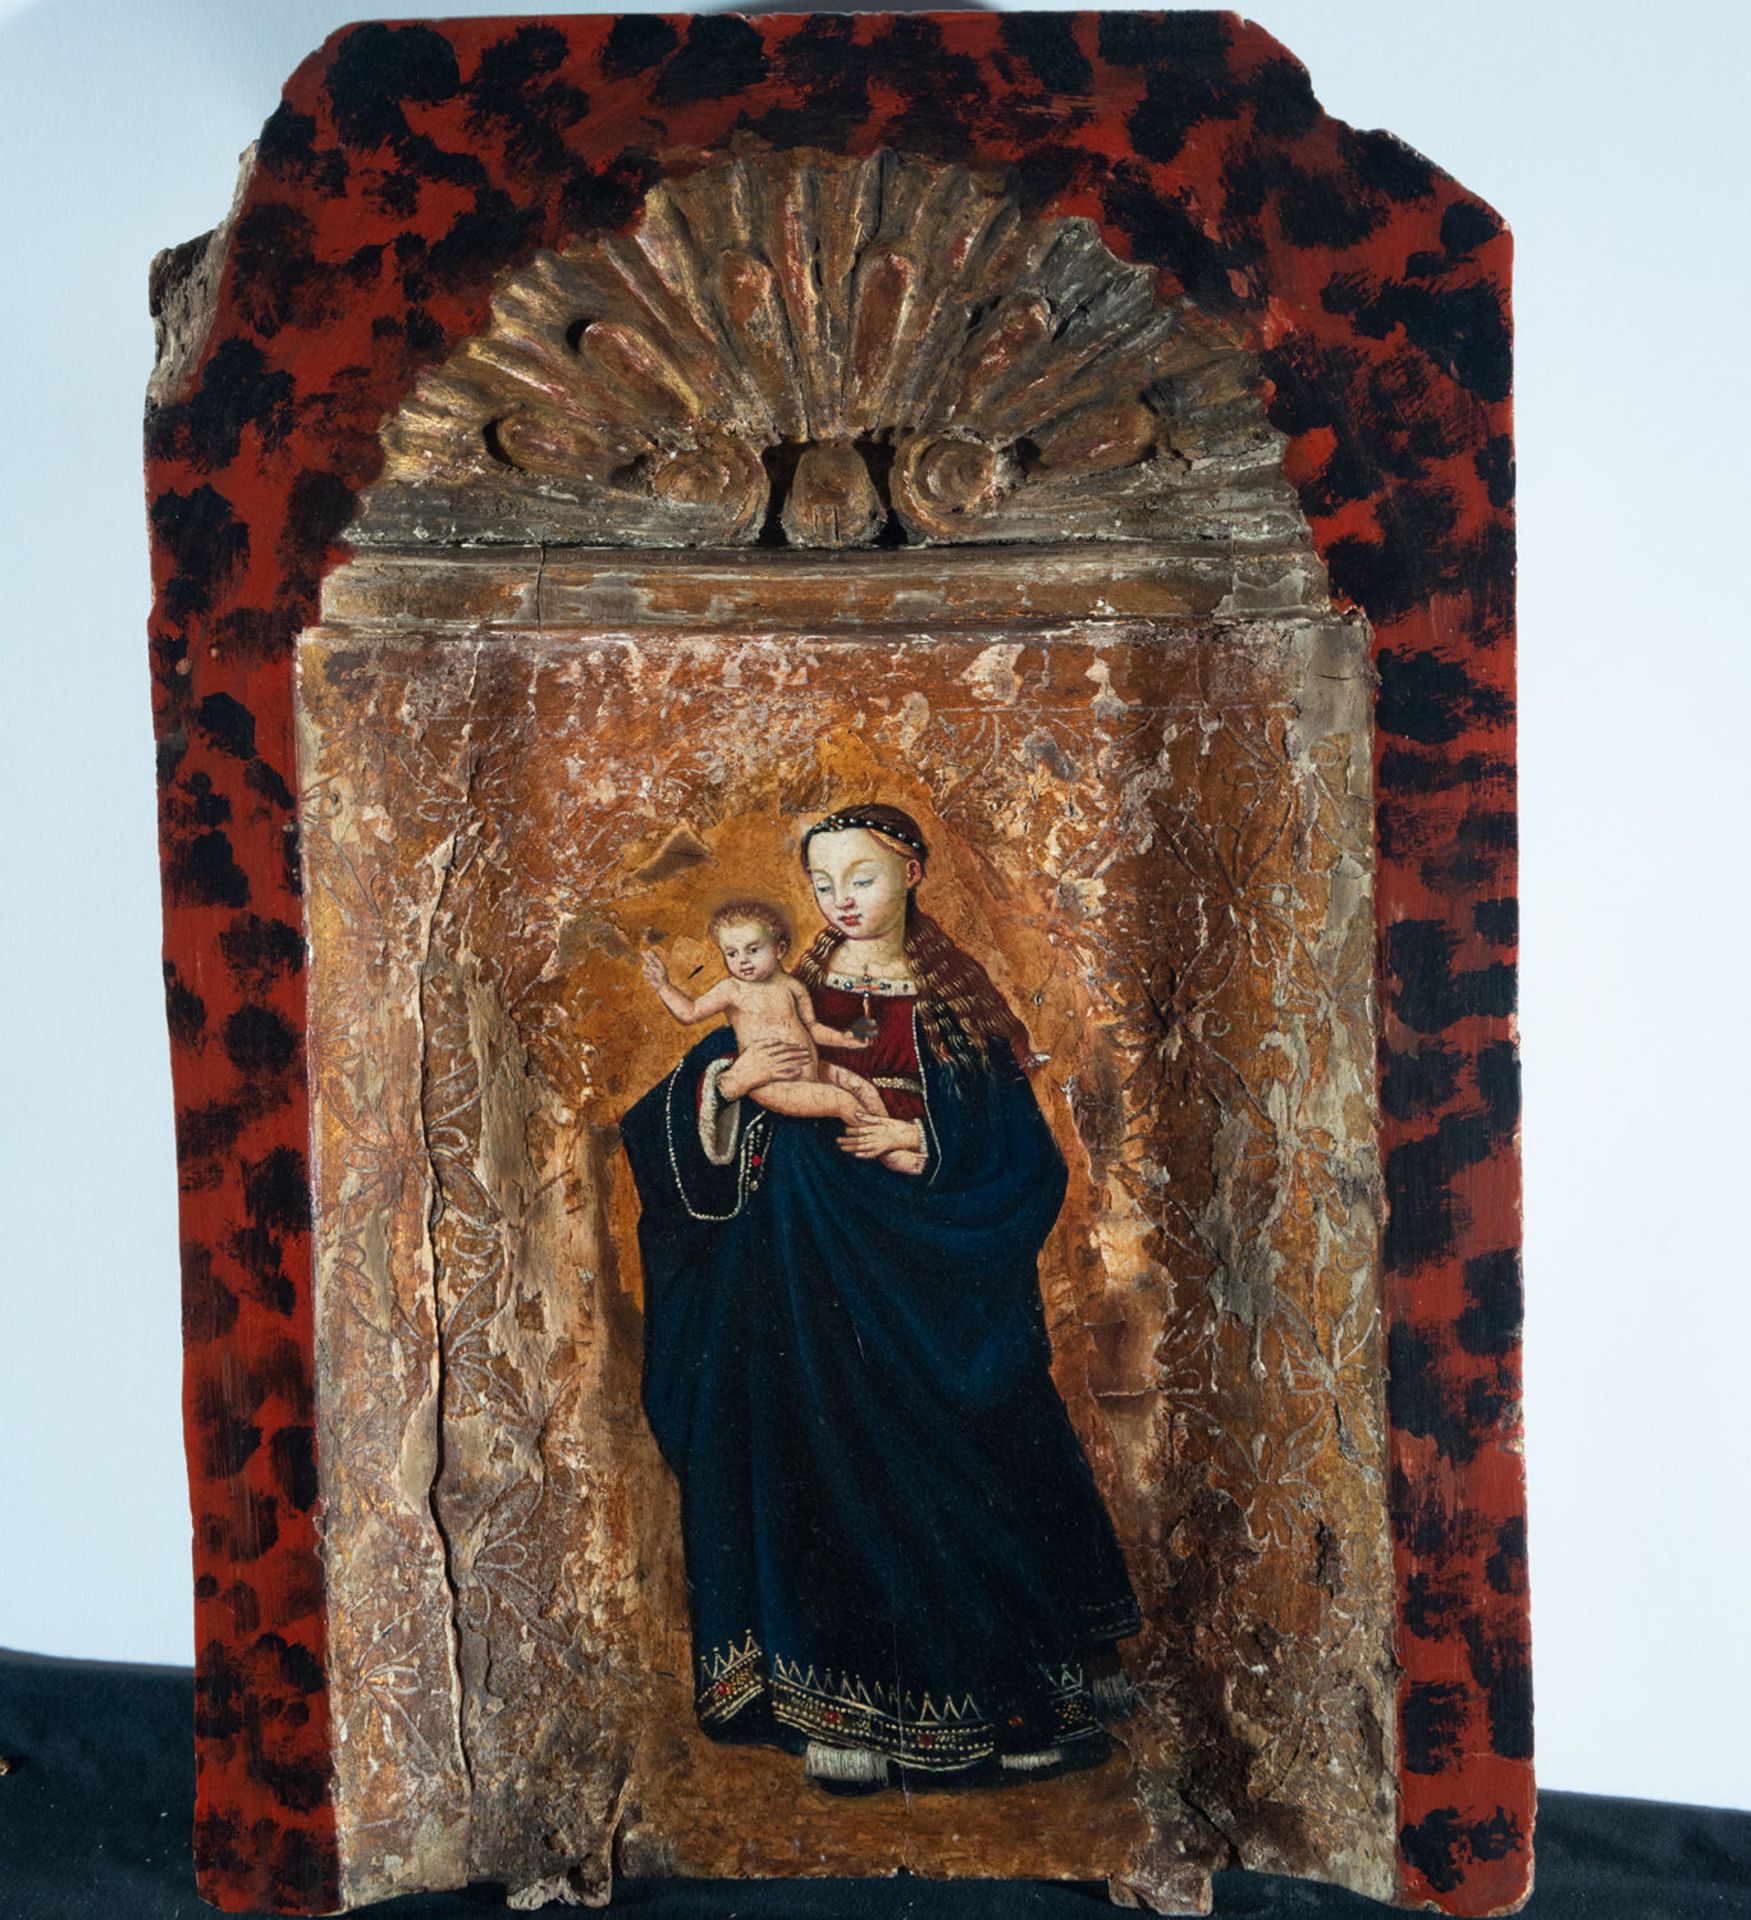 Madonna with Child, Polychrome Tabernacle Door, Hispano-Flemish school from the 16th century